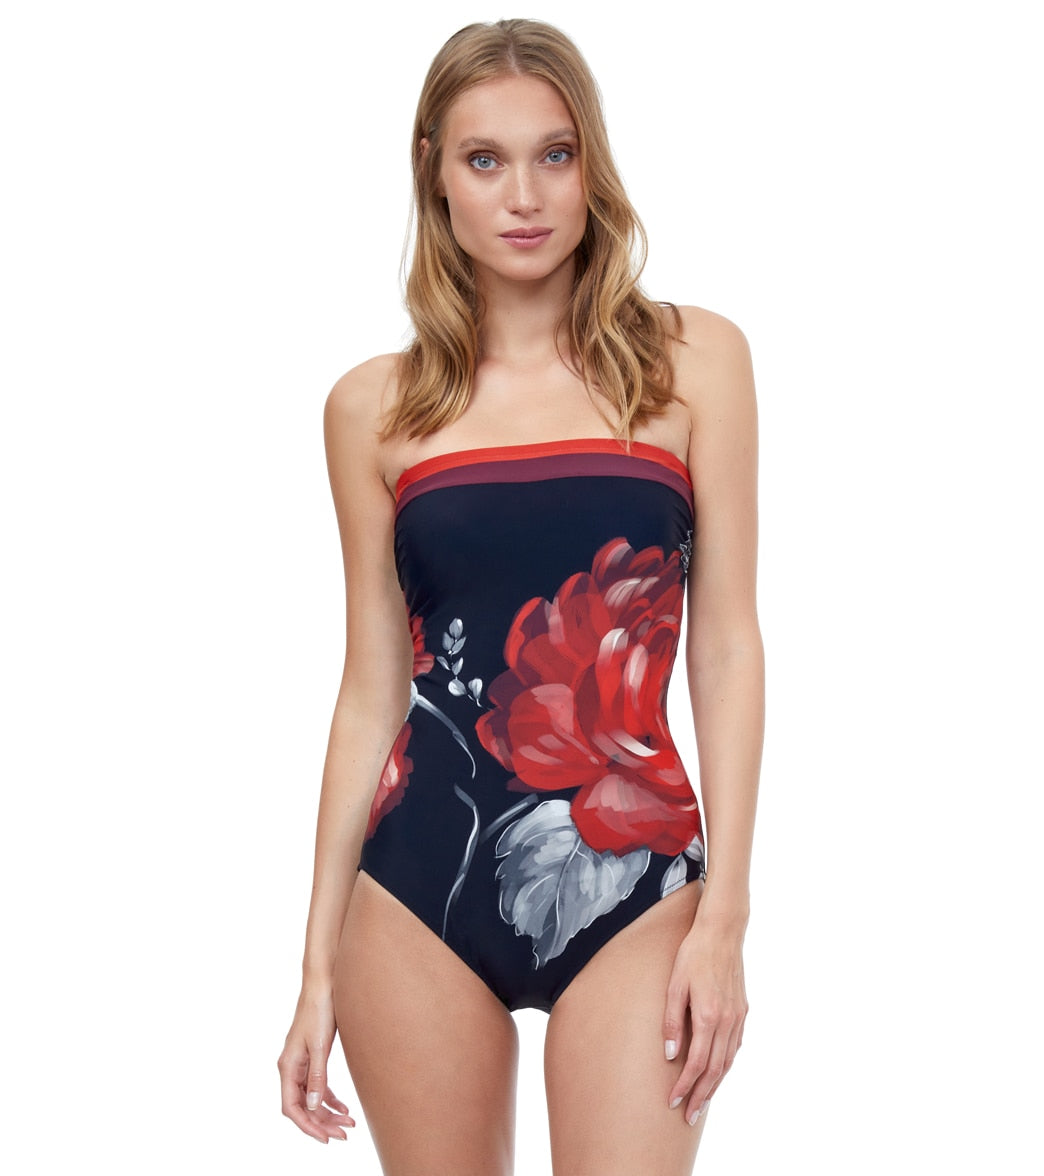 Gottex Women's Roses Are Red Bandeau One Piece Swimsuit - Black/Red 10 - Swimoutlet.com